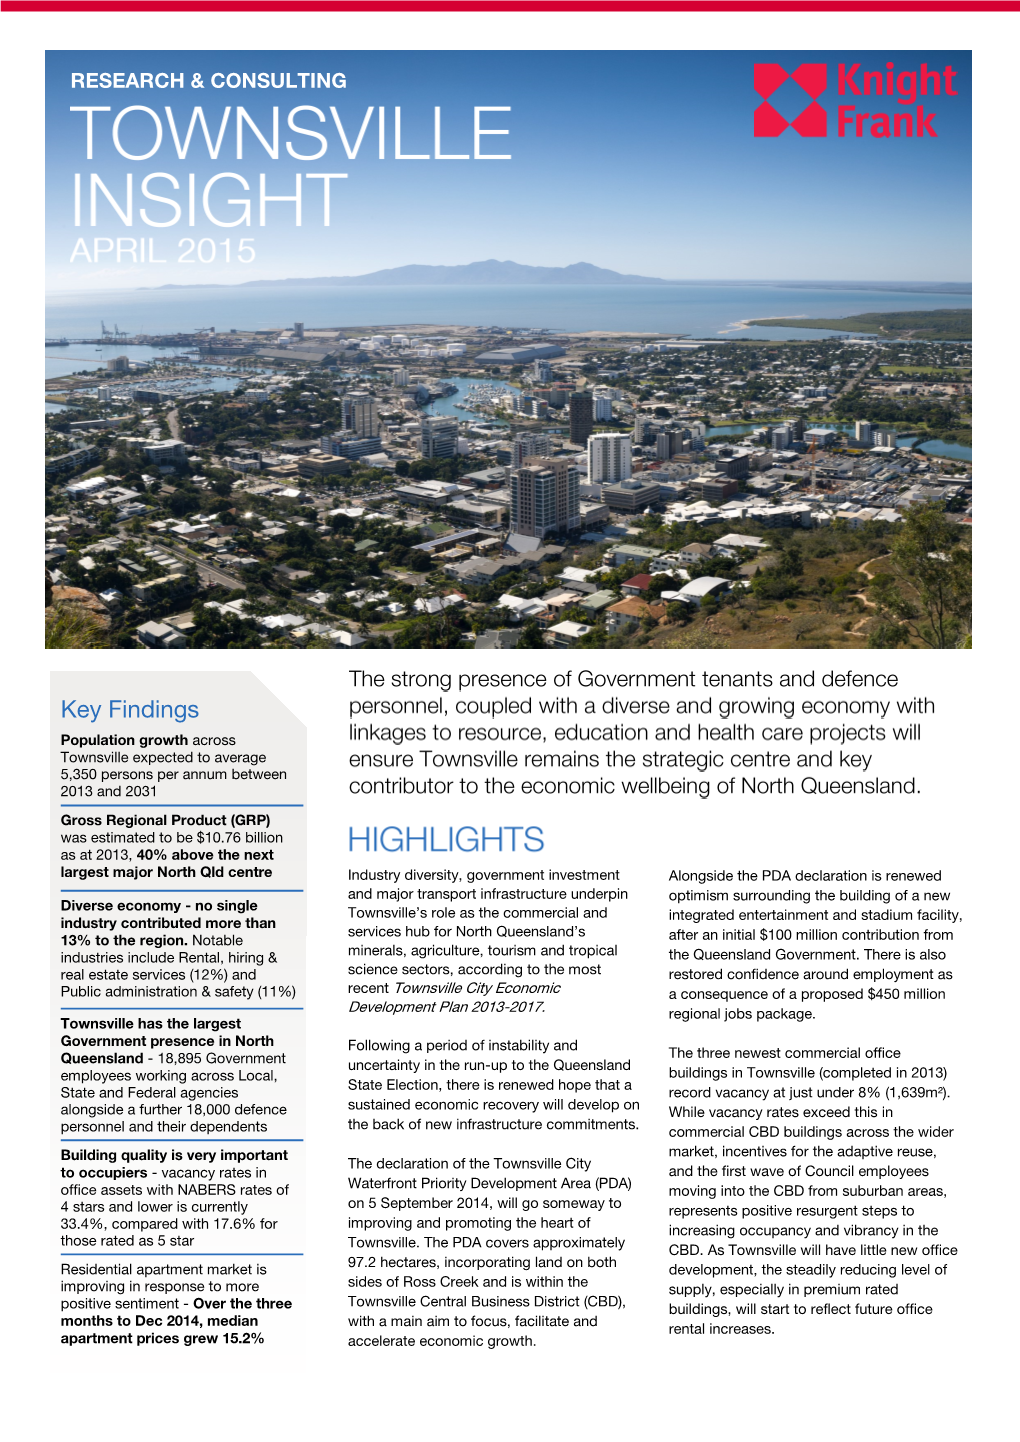 Townsville Insight April 2015 Research